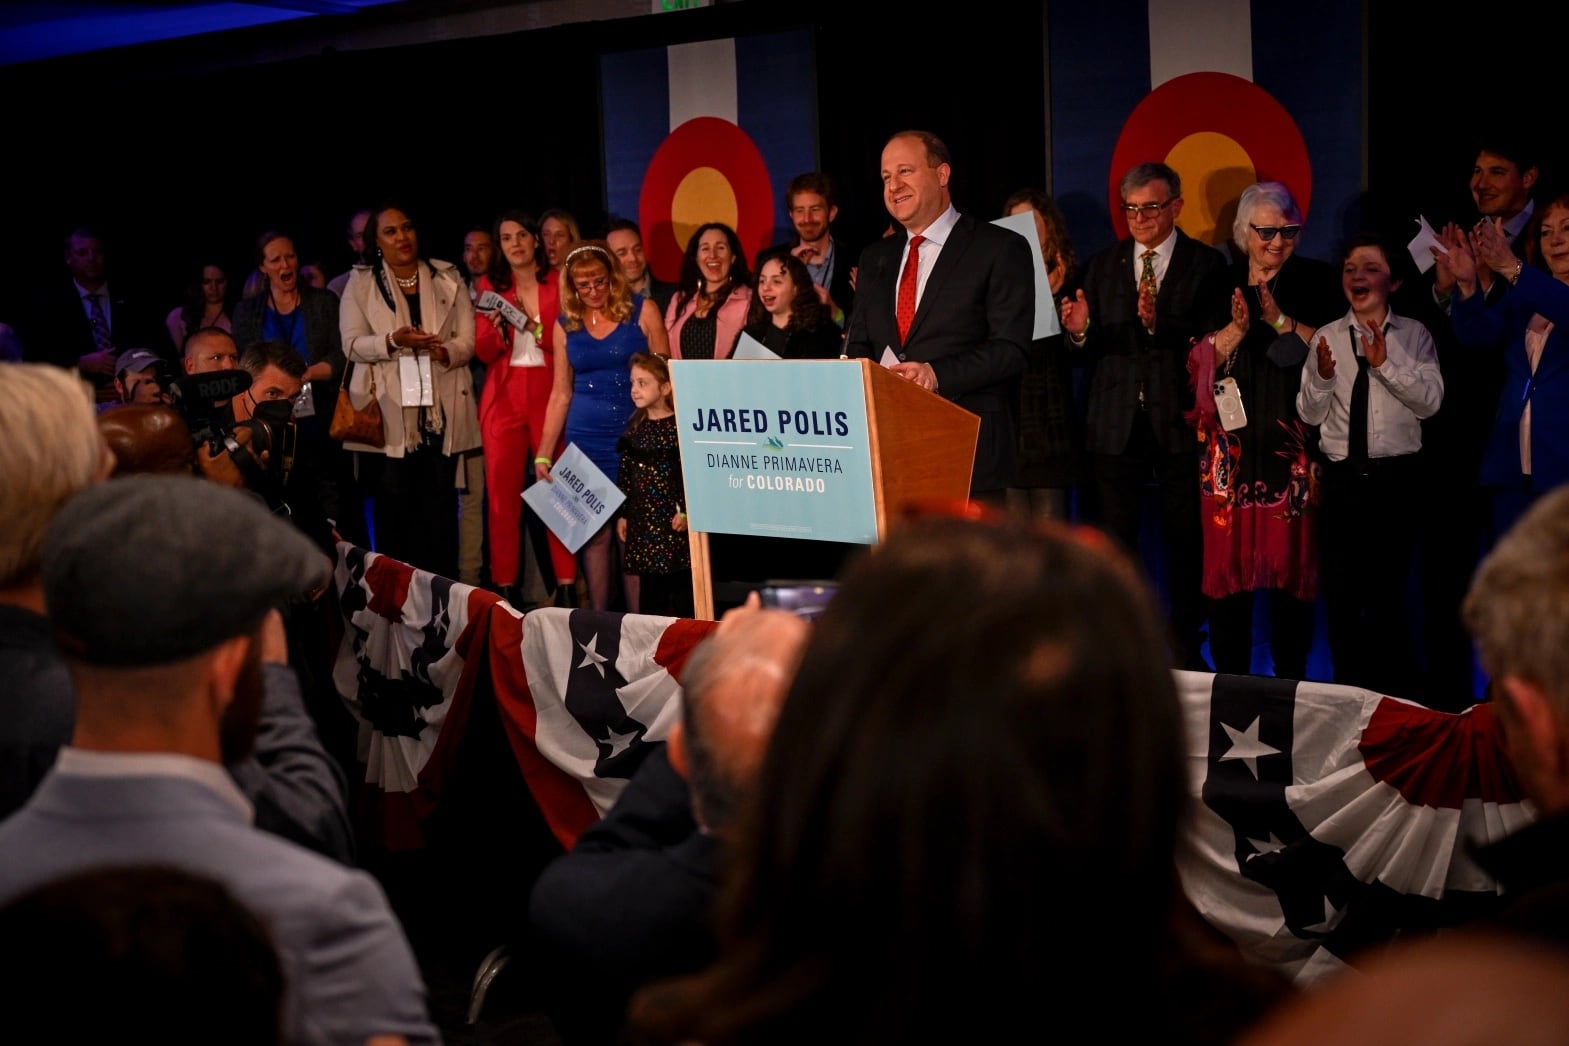 Colorado Gov. Jared Polis speaks from a podium with a large crowd behind him. Colorado flags hang from the wall behind them. 